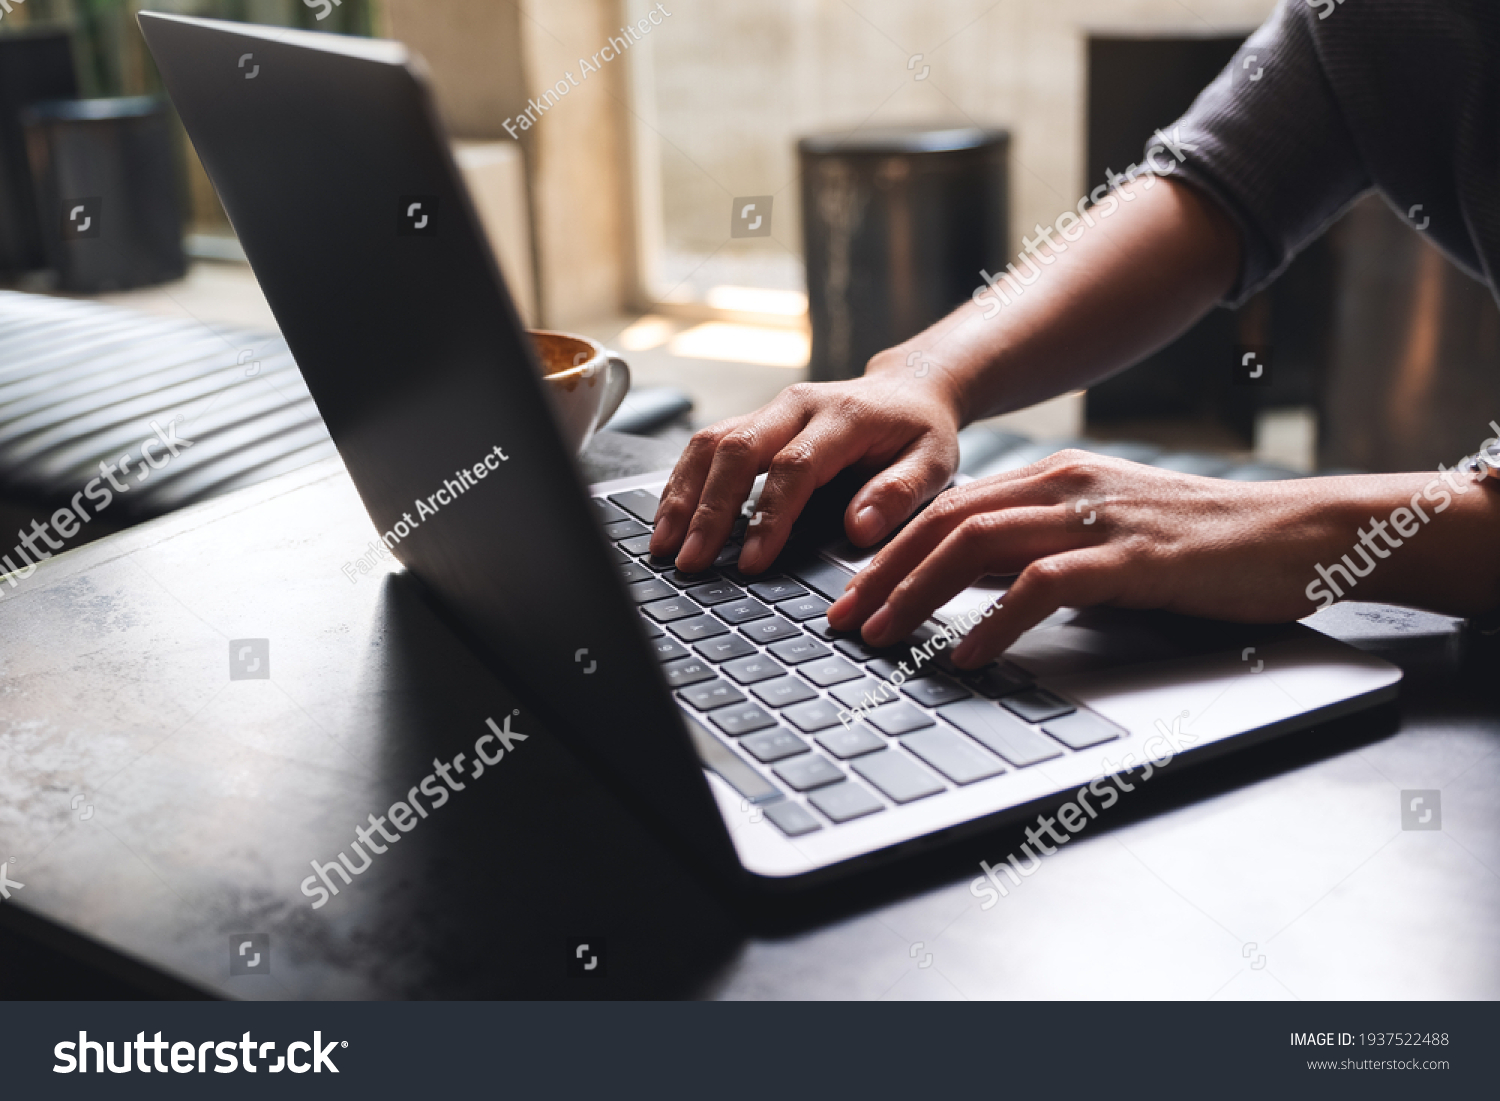 Closeup image of a woman working and typing on laptop computer keyboard on wooden table #1937522488